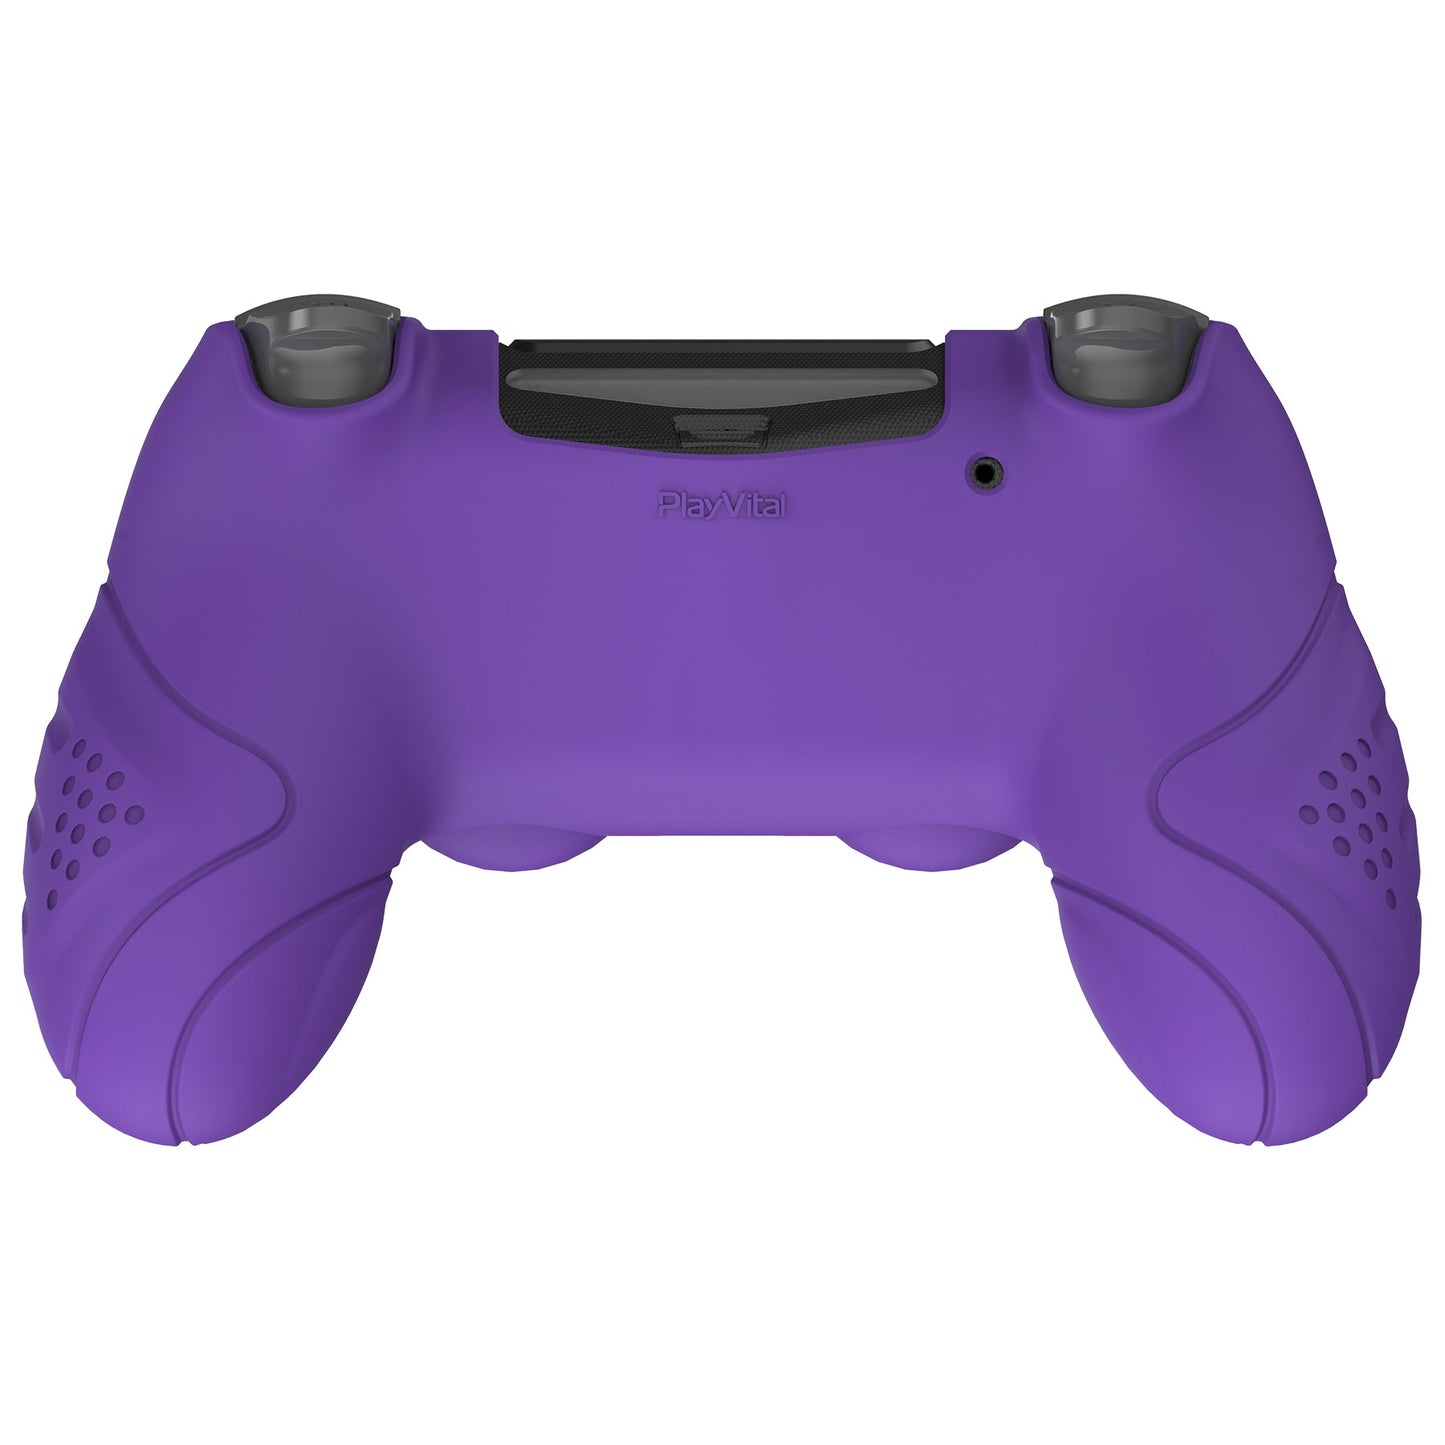 PlayVital Guardian Edition Purple Ergonomic Soft Anti-Slip Controller Silicone Case Cover for PS4, Rubber Protector Skins with black Joystick Caps for PS4 Slim PS4 Pro Controller - P4CC0065 playvital